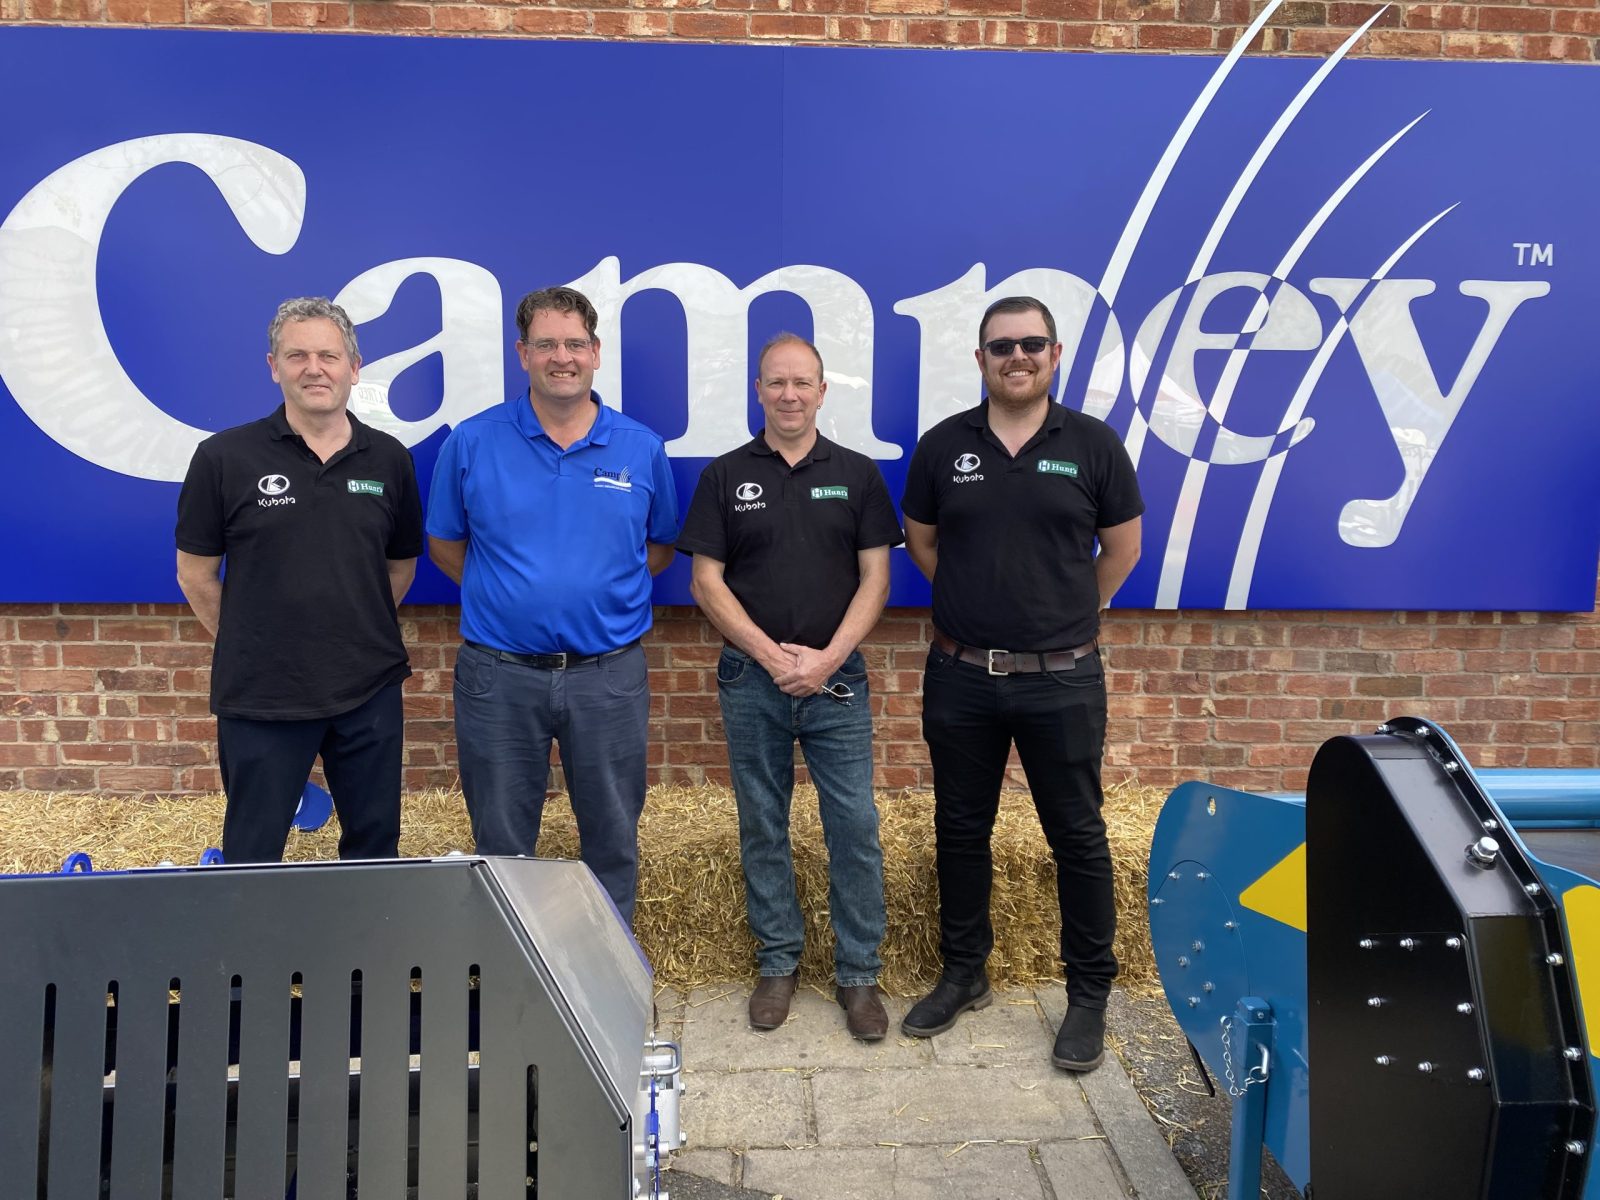 Campey left to right – Jeff Deane Sales manager, Jason Moody Campey Turf Care Systems, Peter Hunt MD and Richard Lucas Sales Manager. (2)